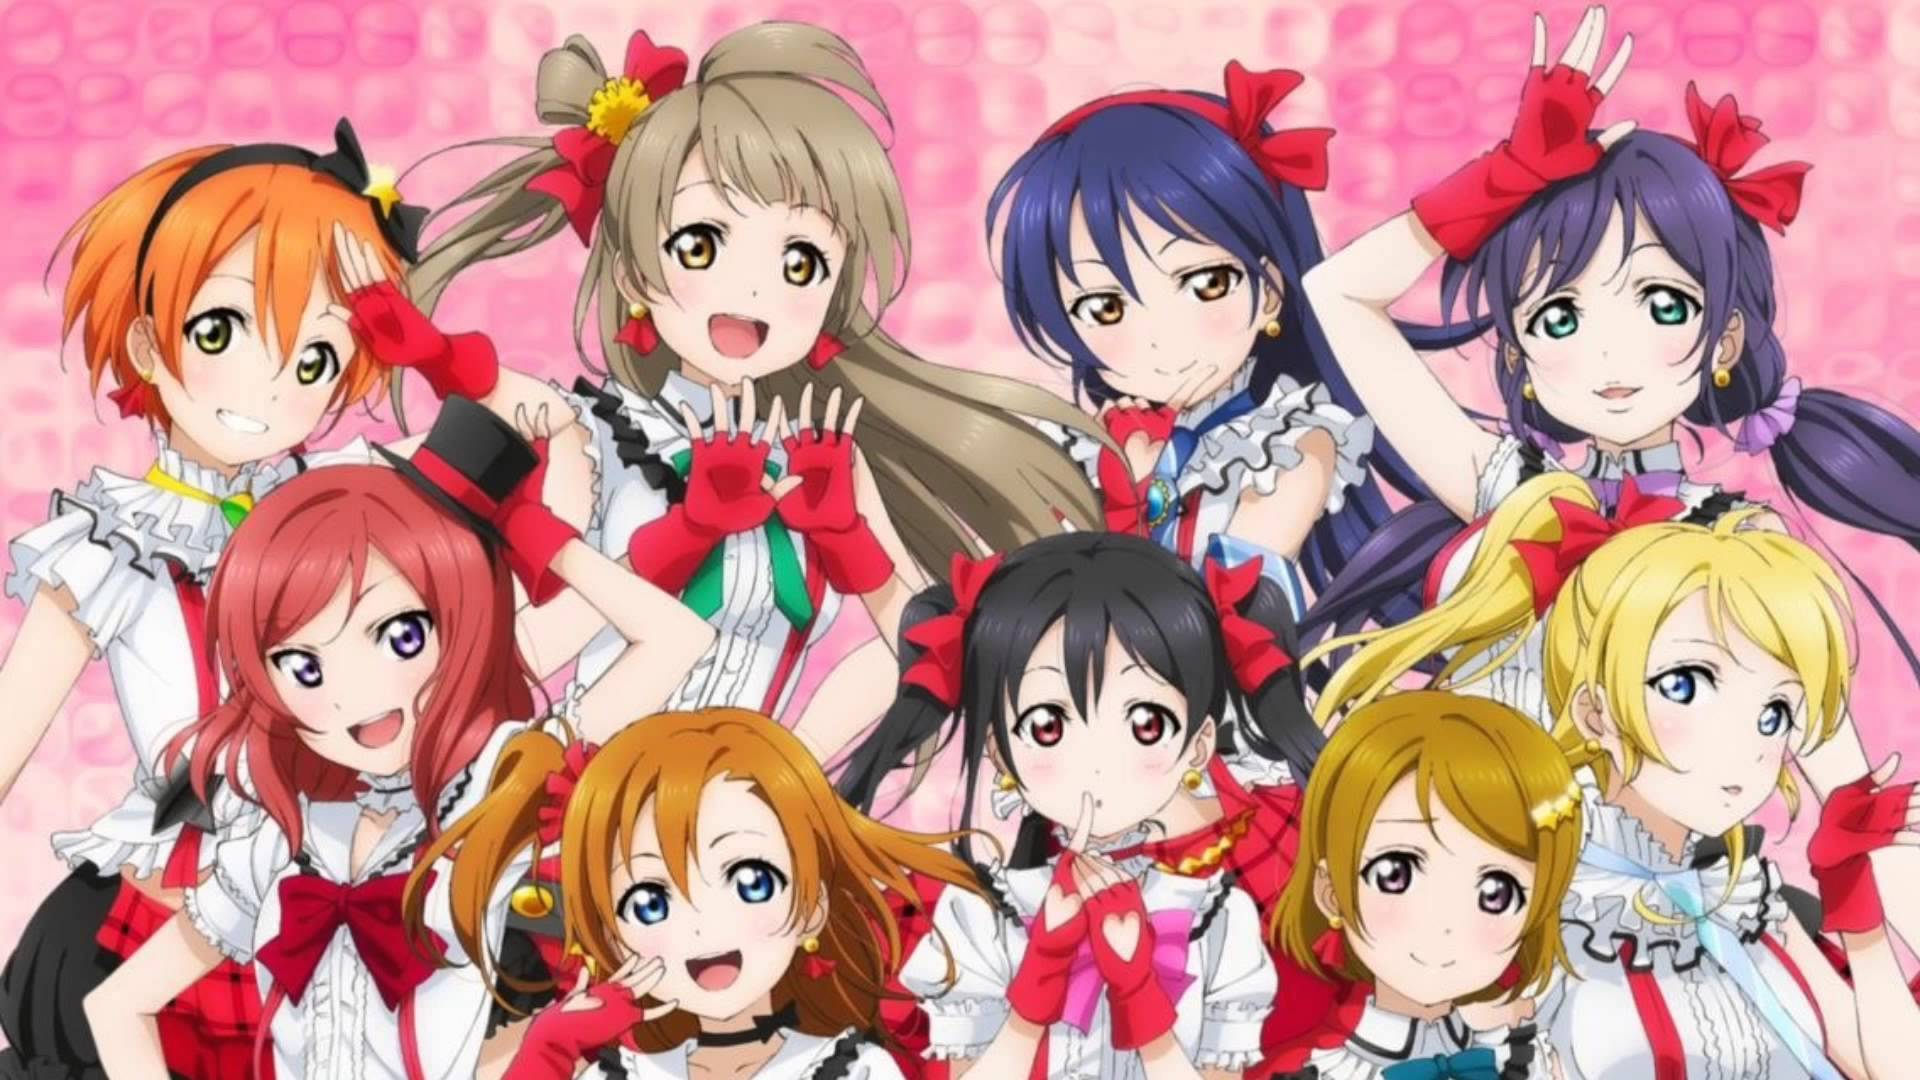 Love Live Wallpapers Anime Hq Love Live Pictures 4k